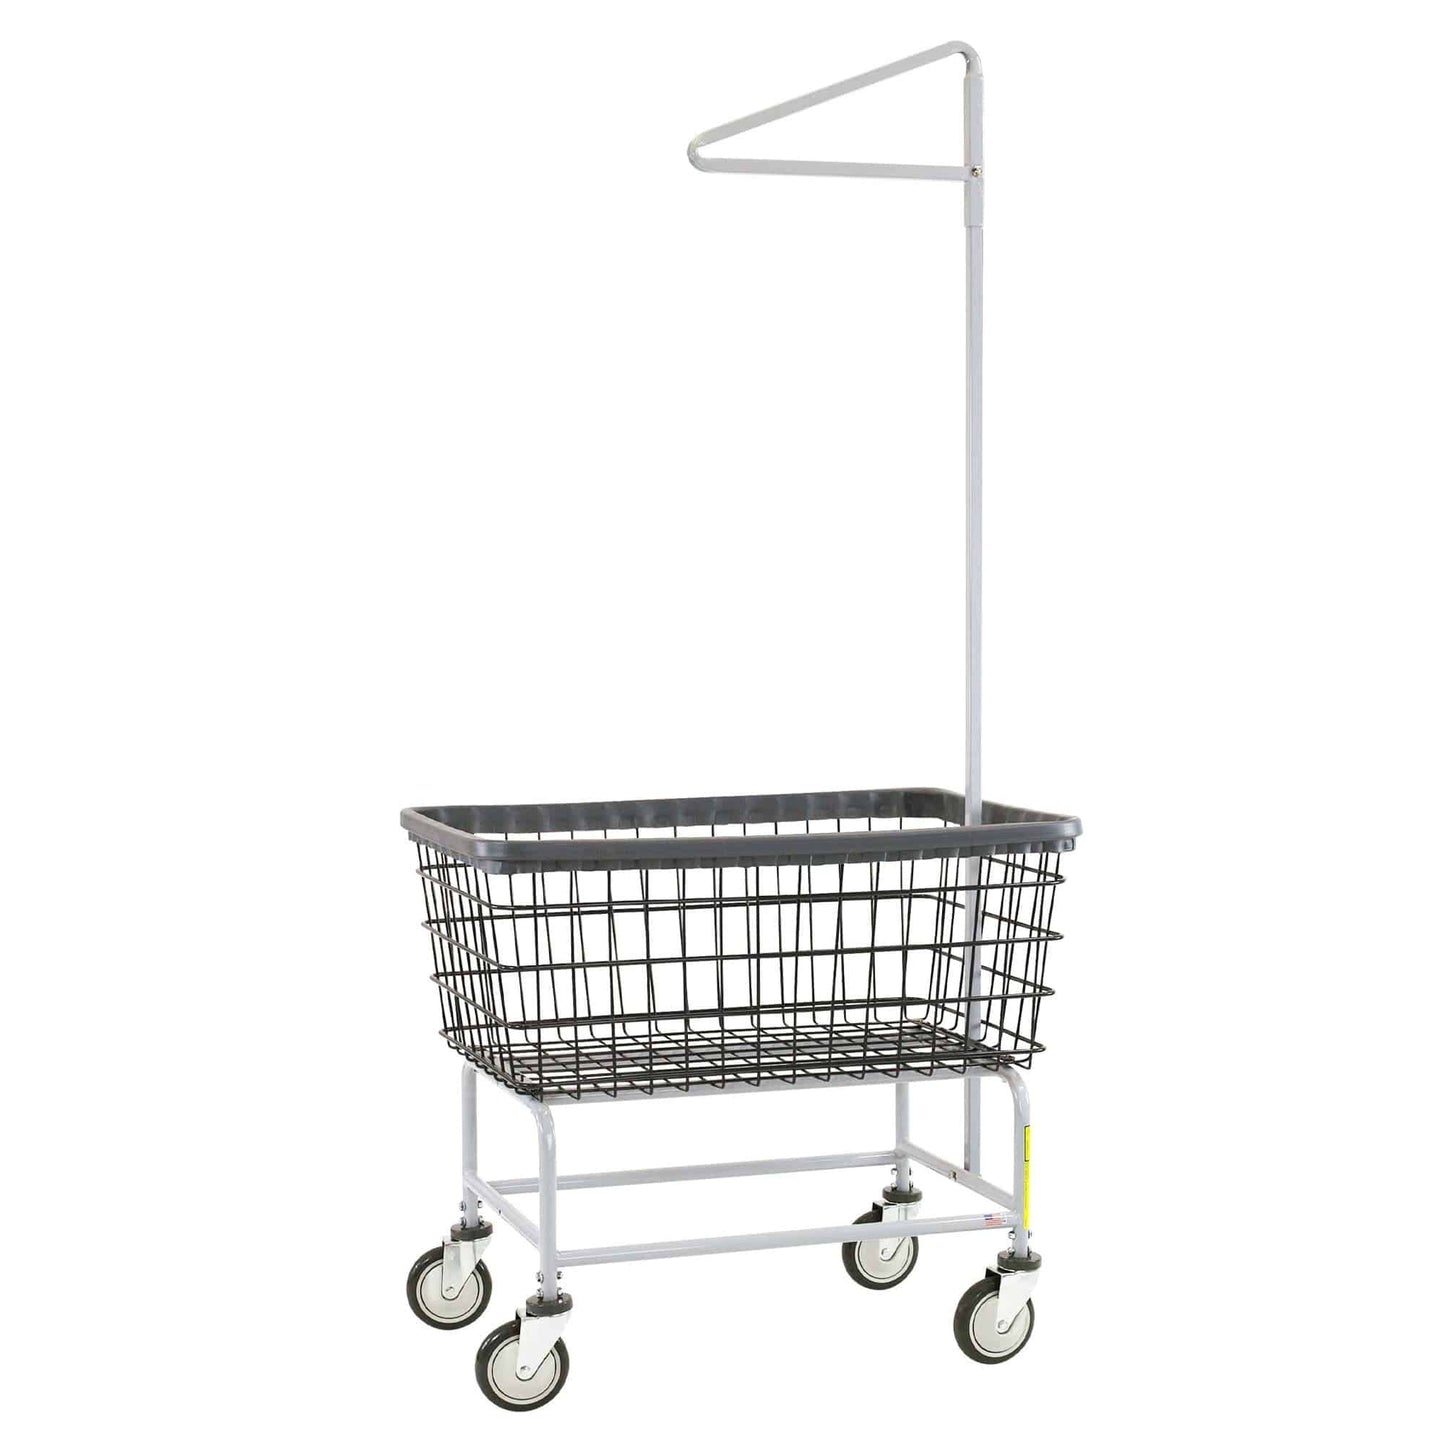 Large Capacity Laundry Cart with Single Pole Rack - R&B Wire